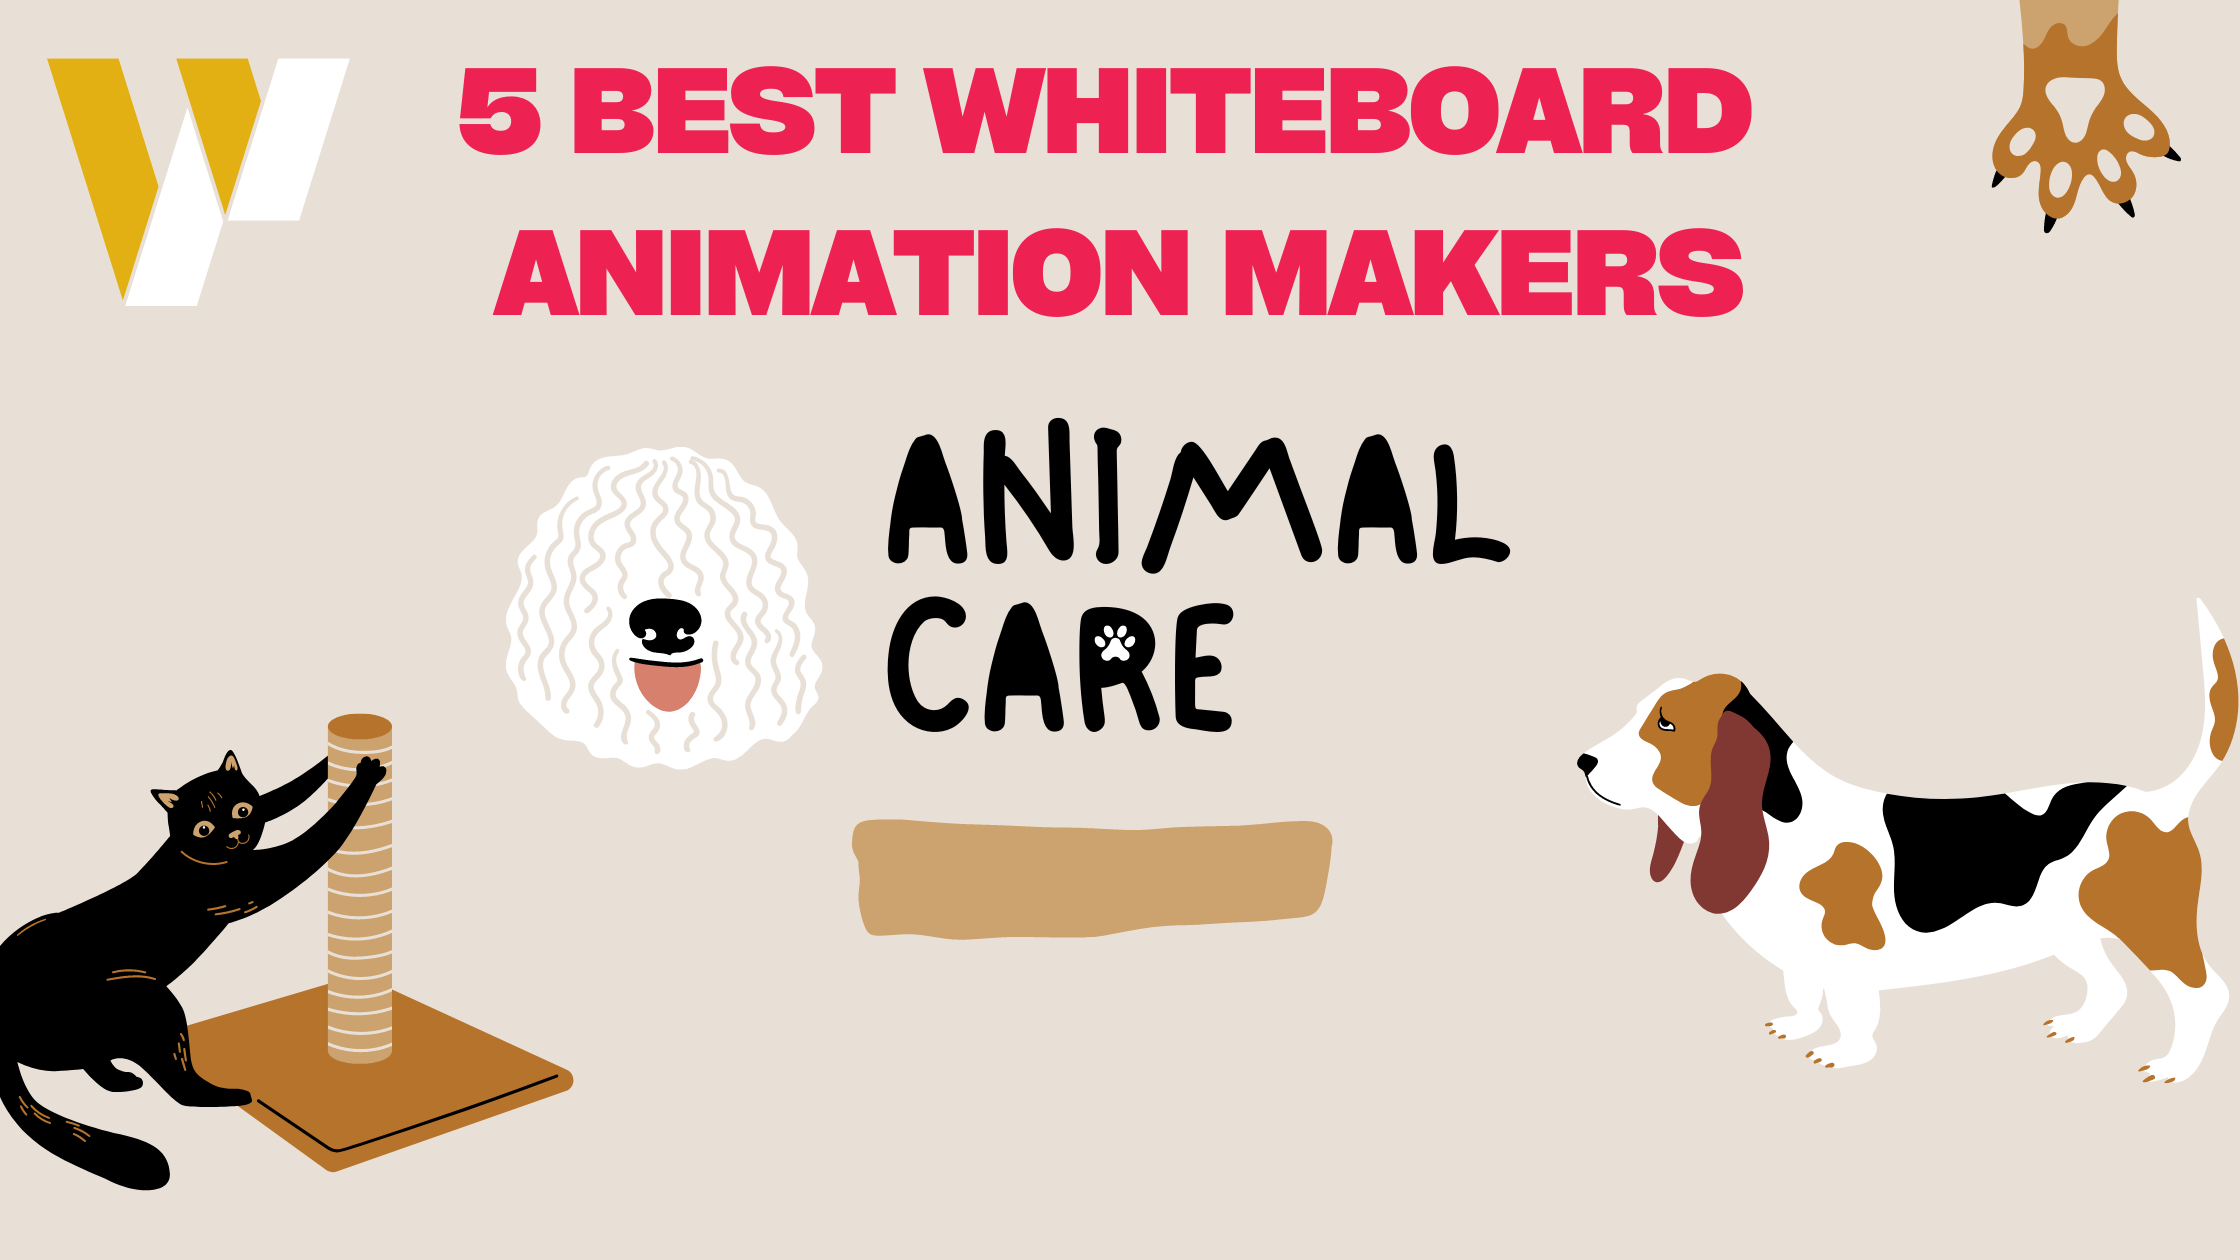 5 Best Whiteboard Animation Makers